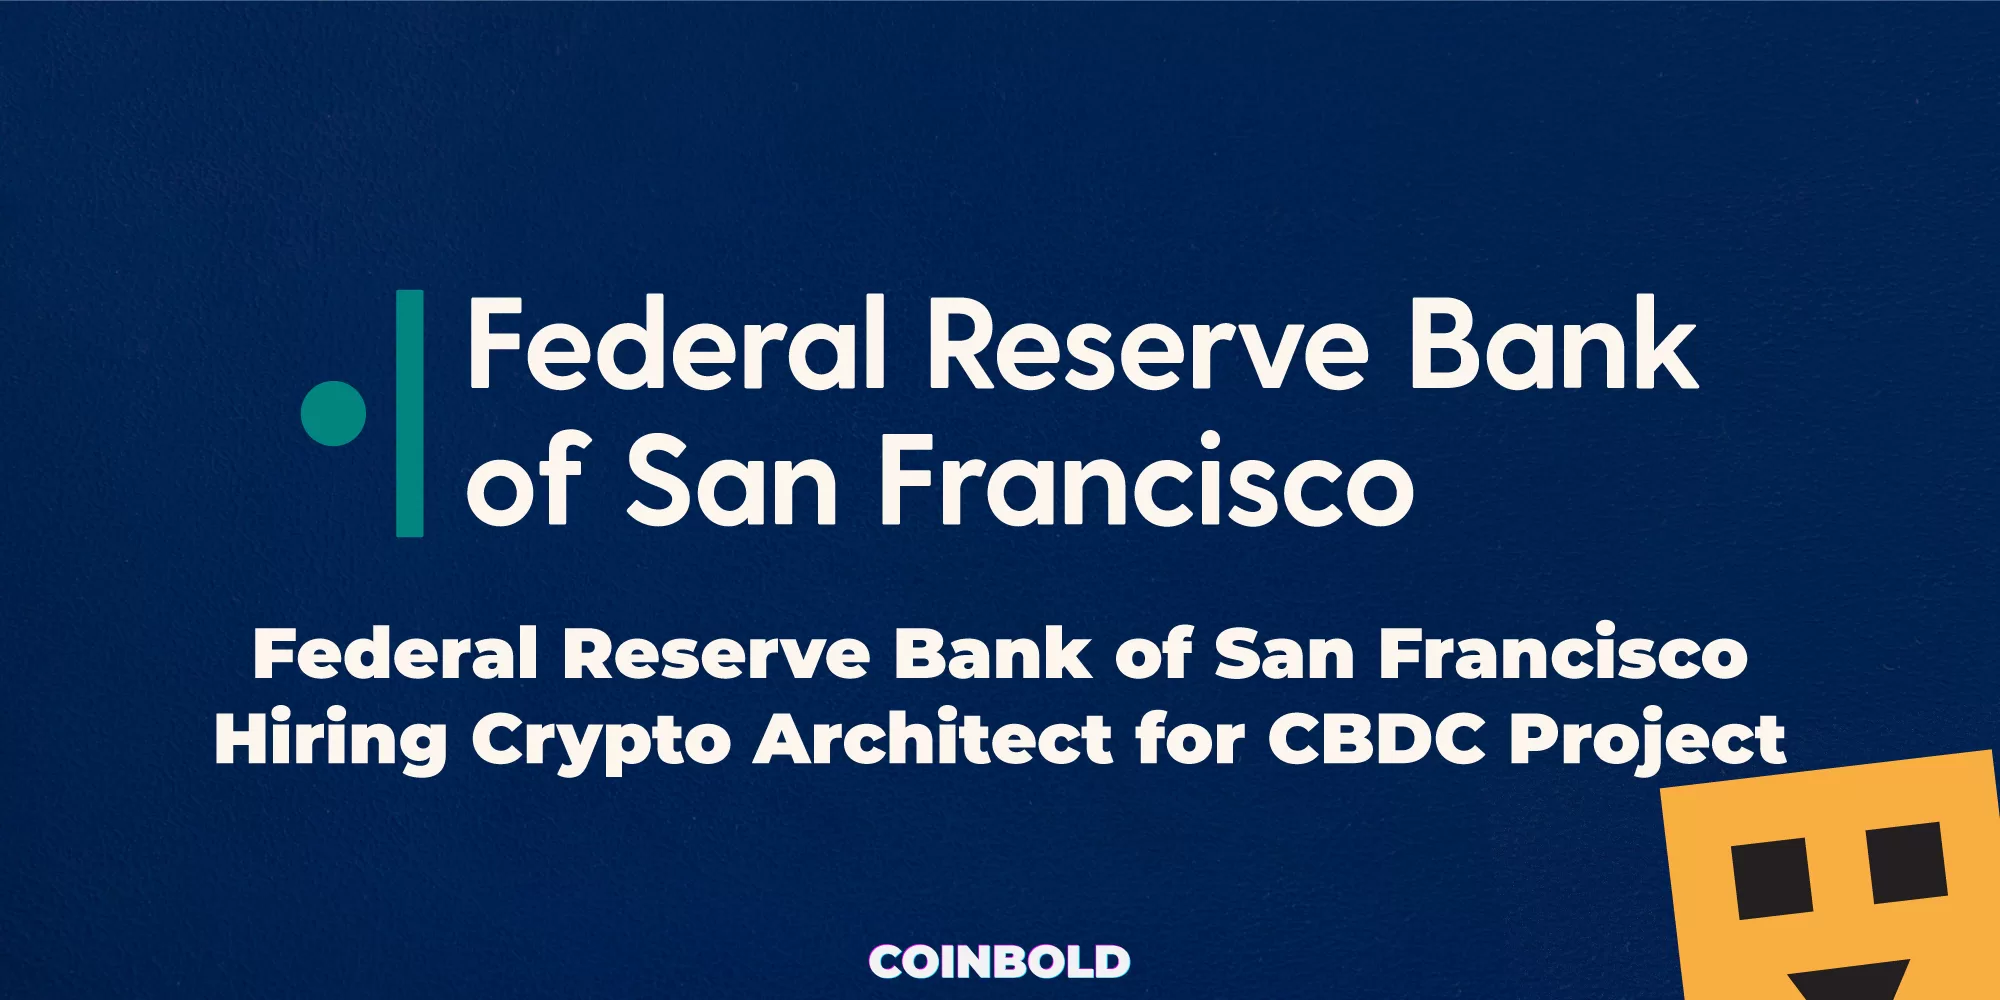 Federal Reserve Bank of San Francisco Hiring Crypto Architect for CBDC Project